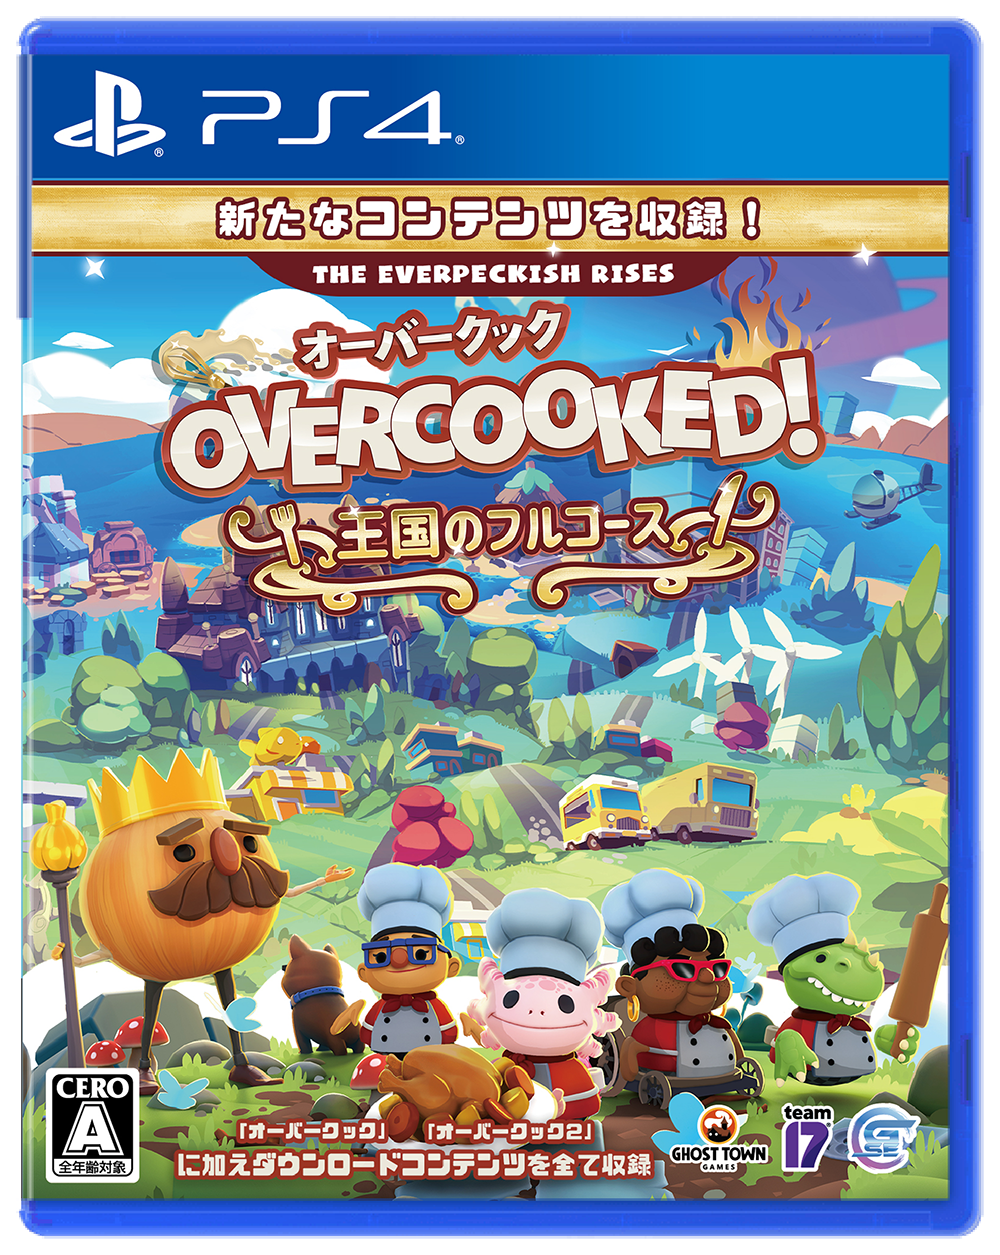 OVERCOOKED!,オーバークック,王国のフルコース,PS5,Team17,Ghost Town Games,GSE,